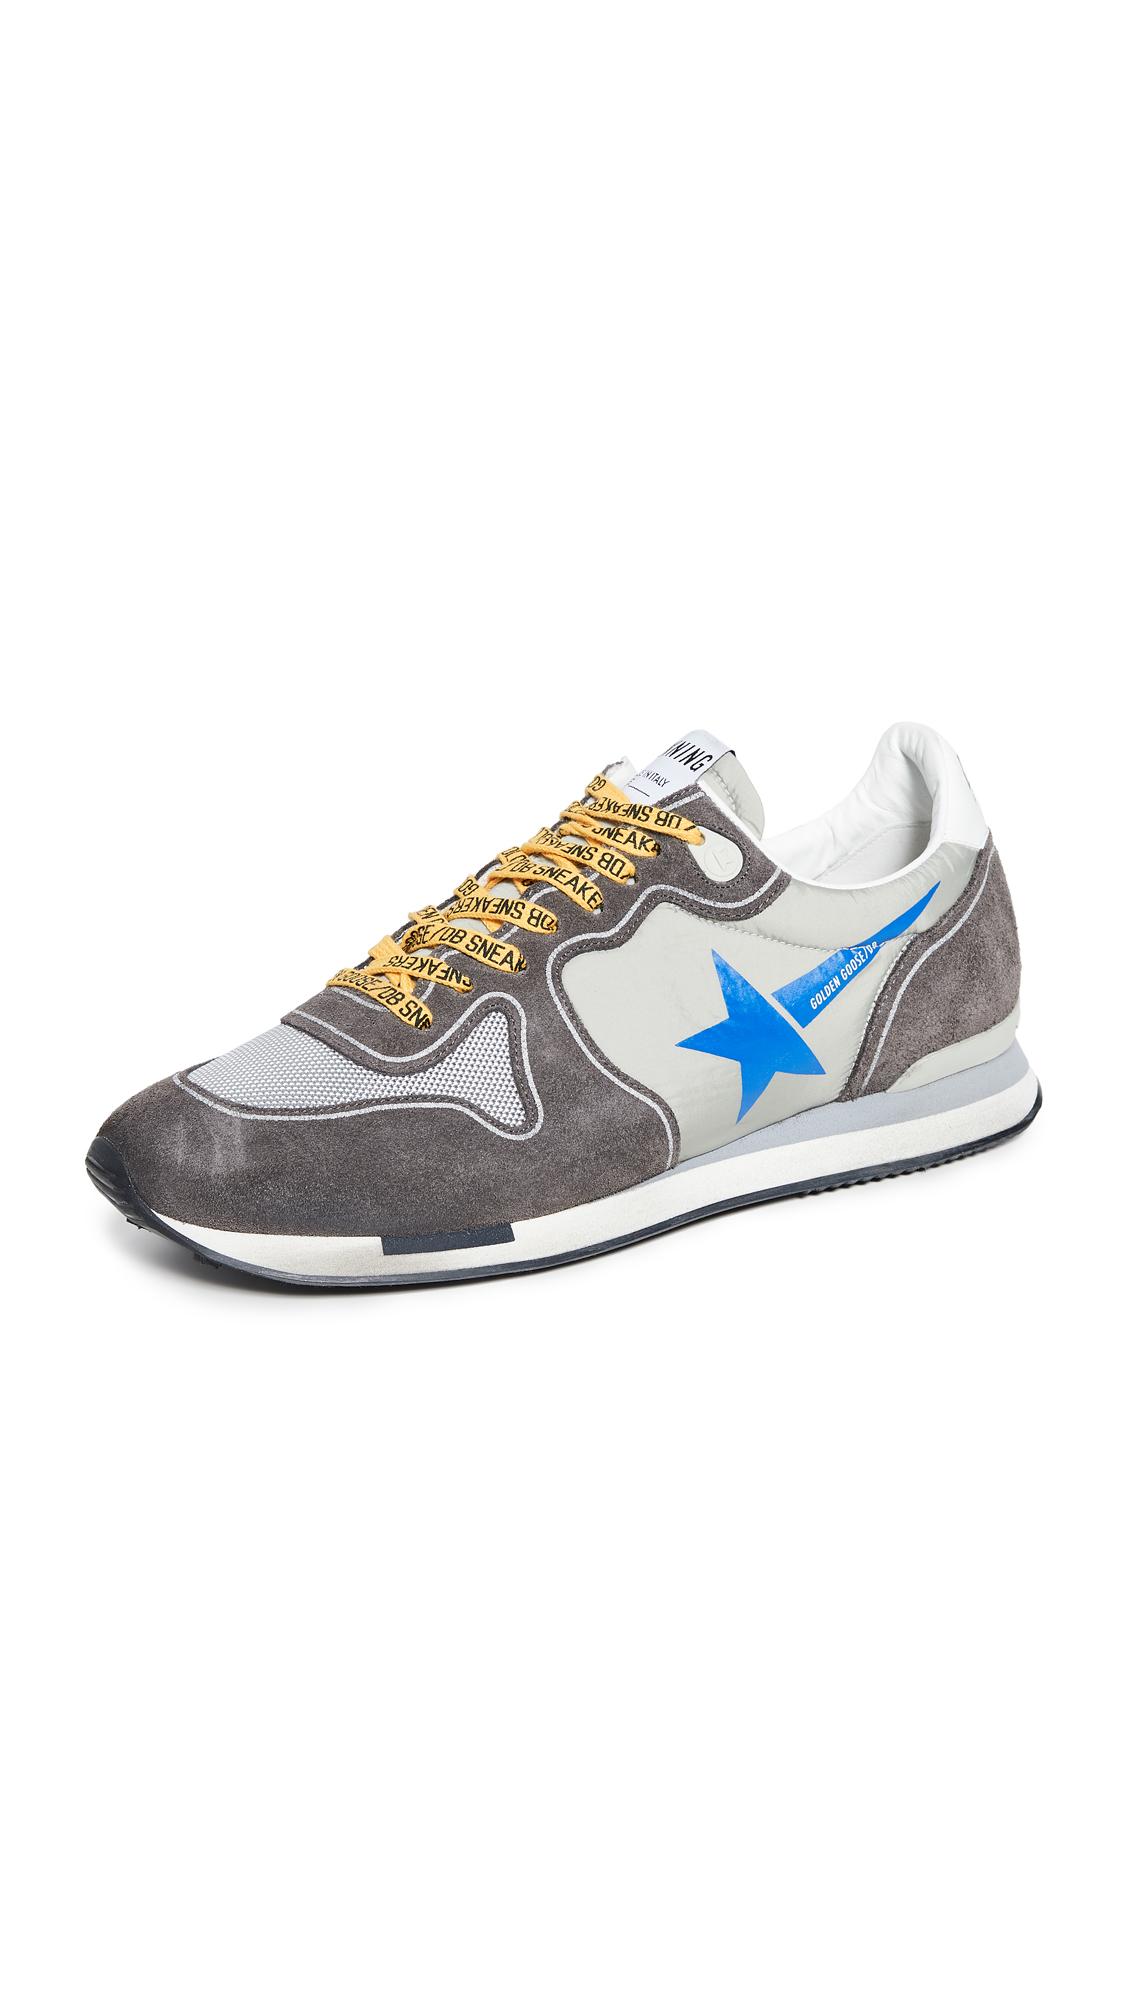 Golden Goose Deluxe Brand Leather Running Sneakers in Grey (Gray) for ...